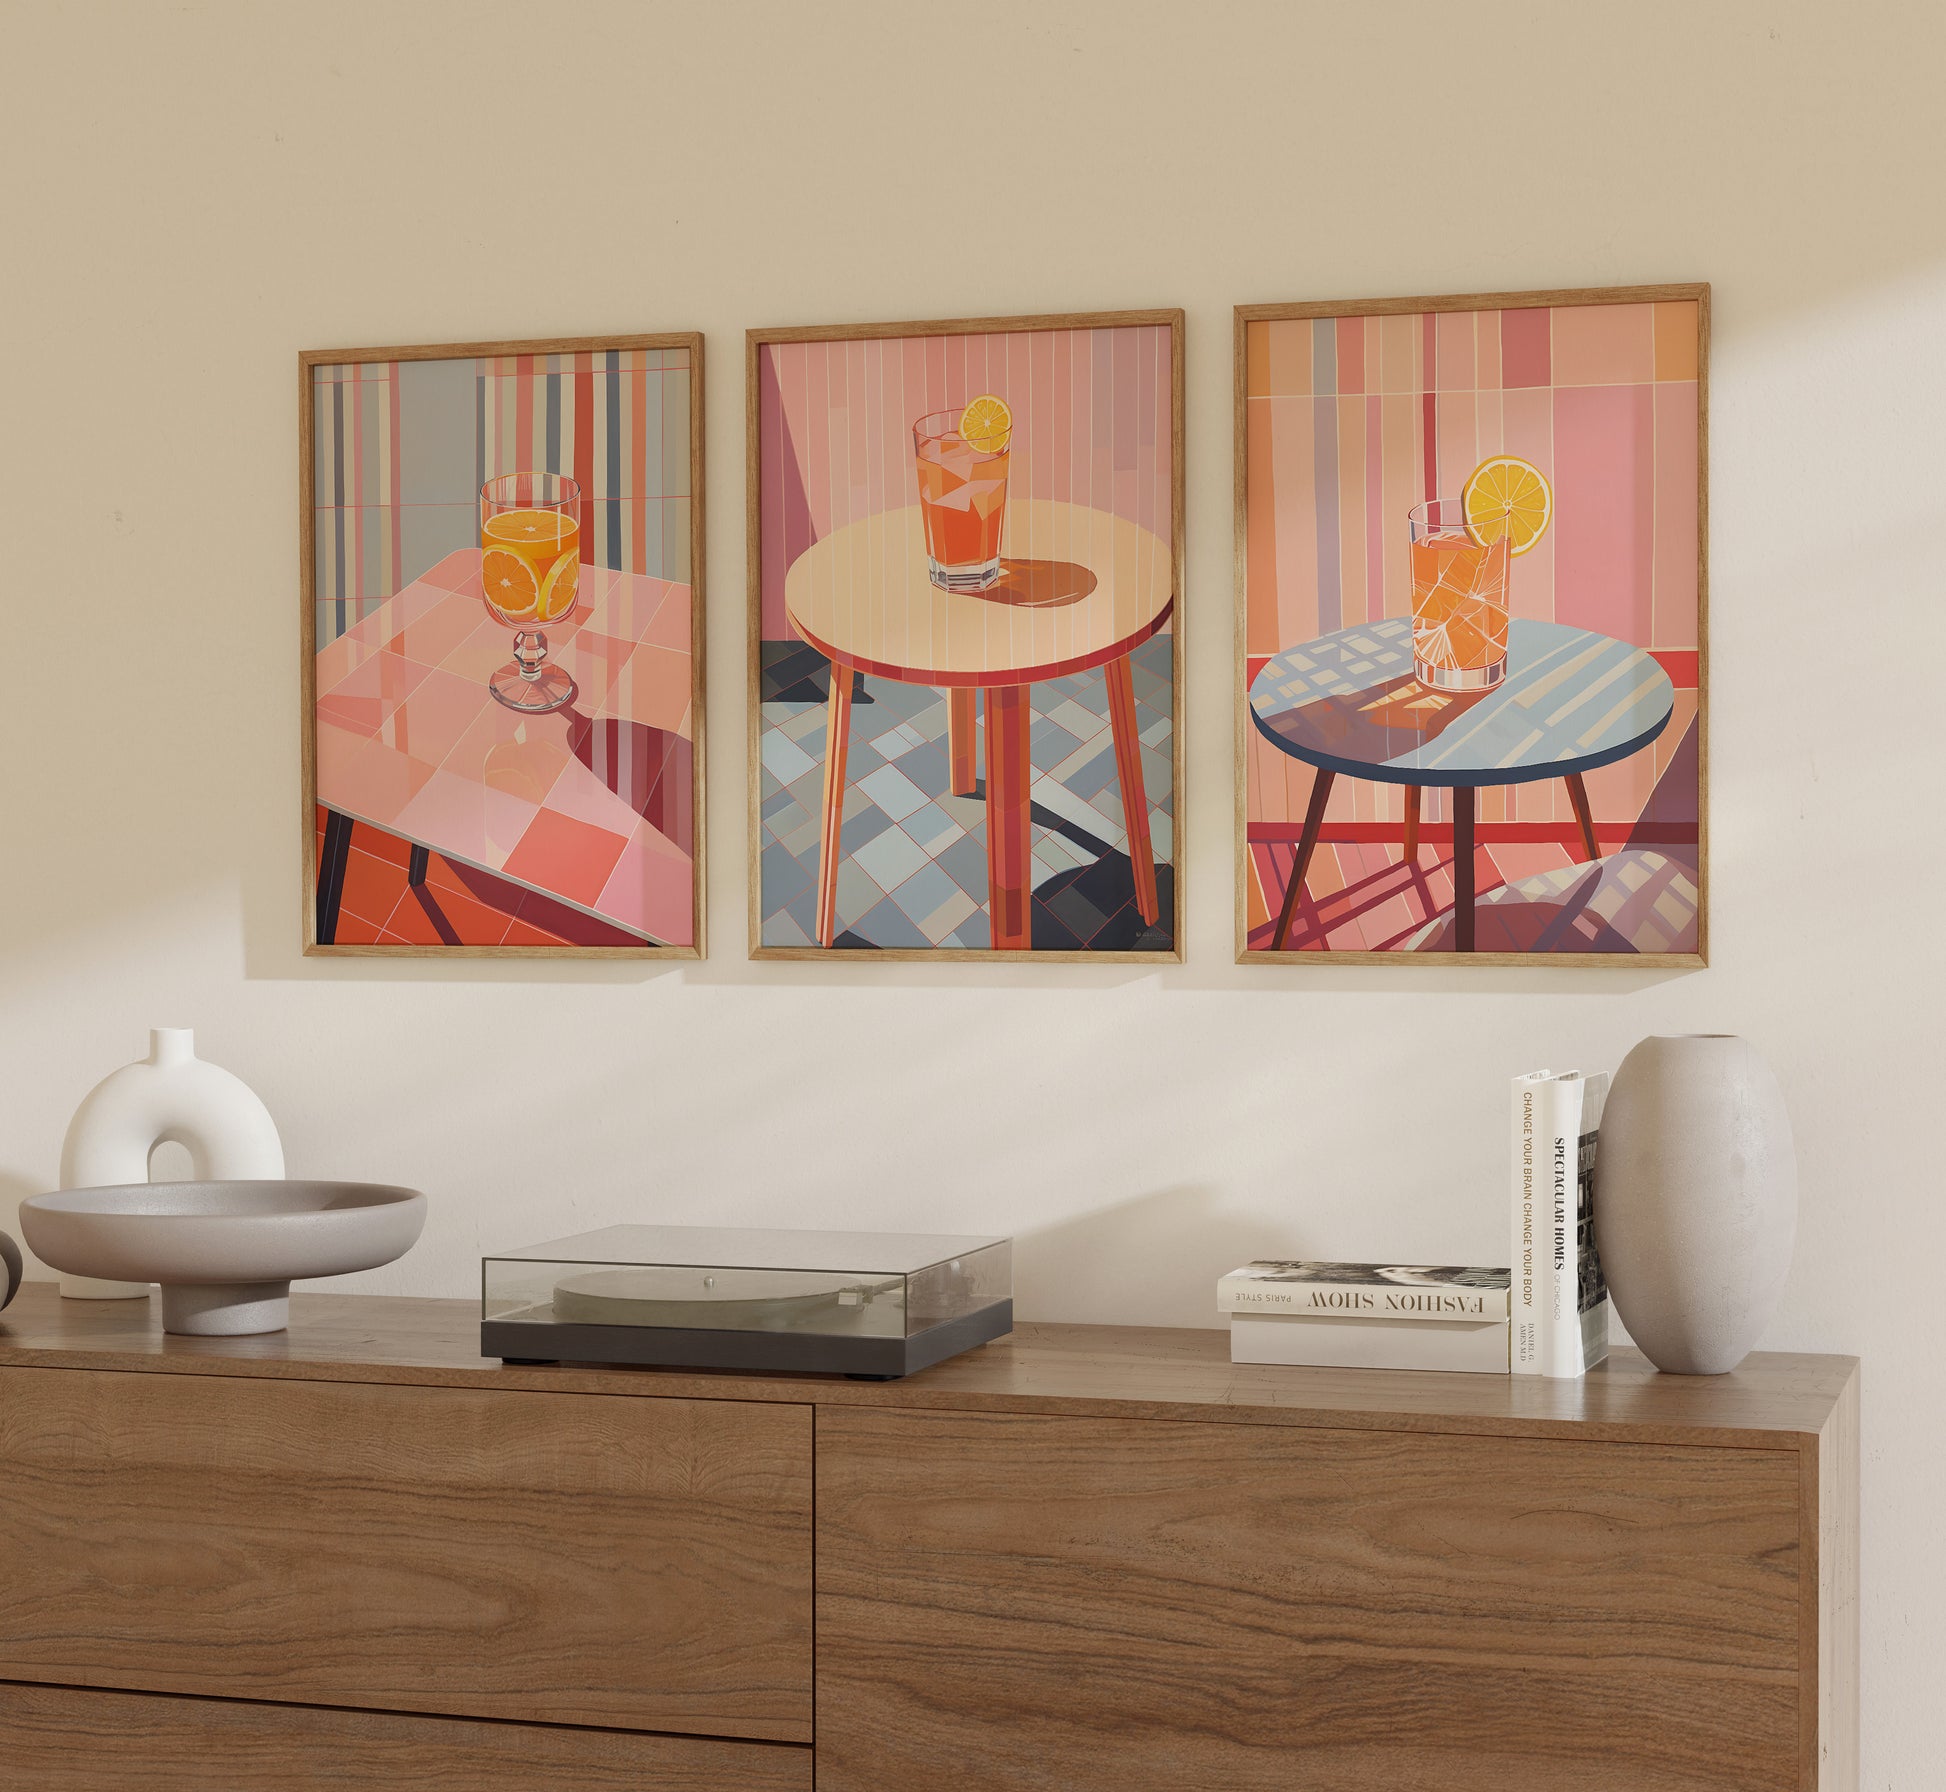 Three geometric art prints depicting cocktails on tables, displayed above a wooden credenza.